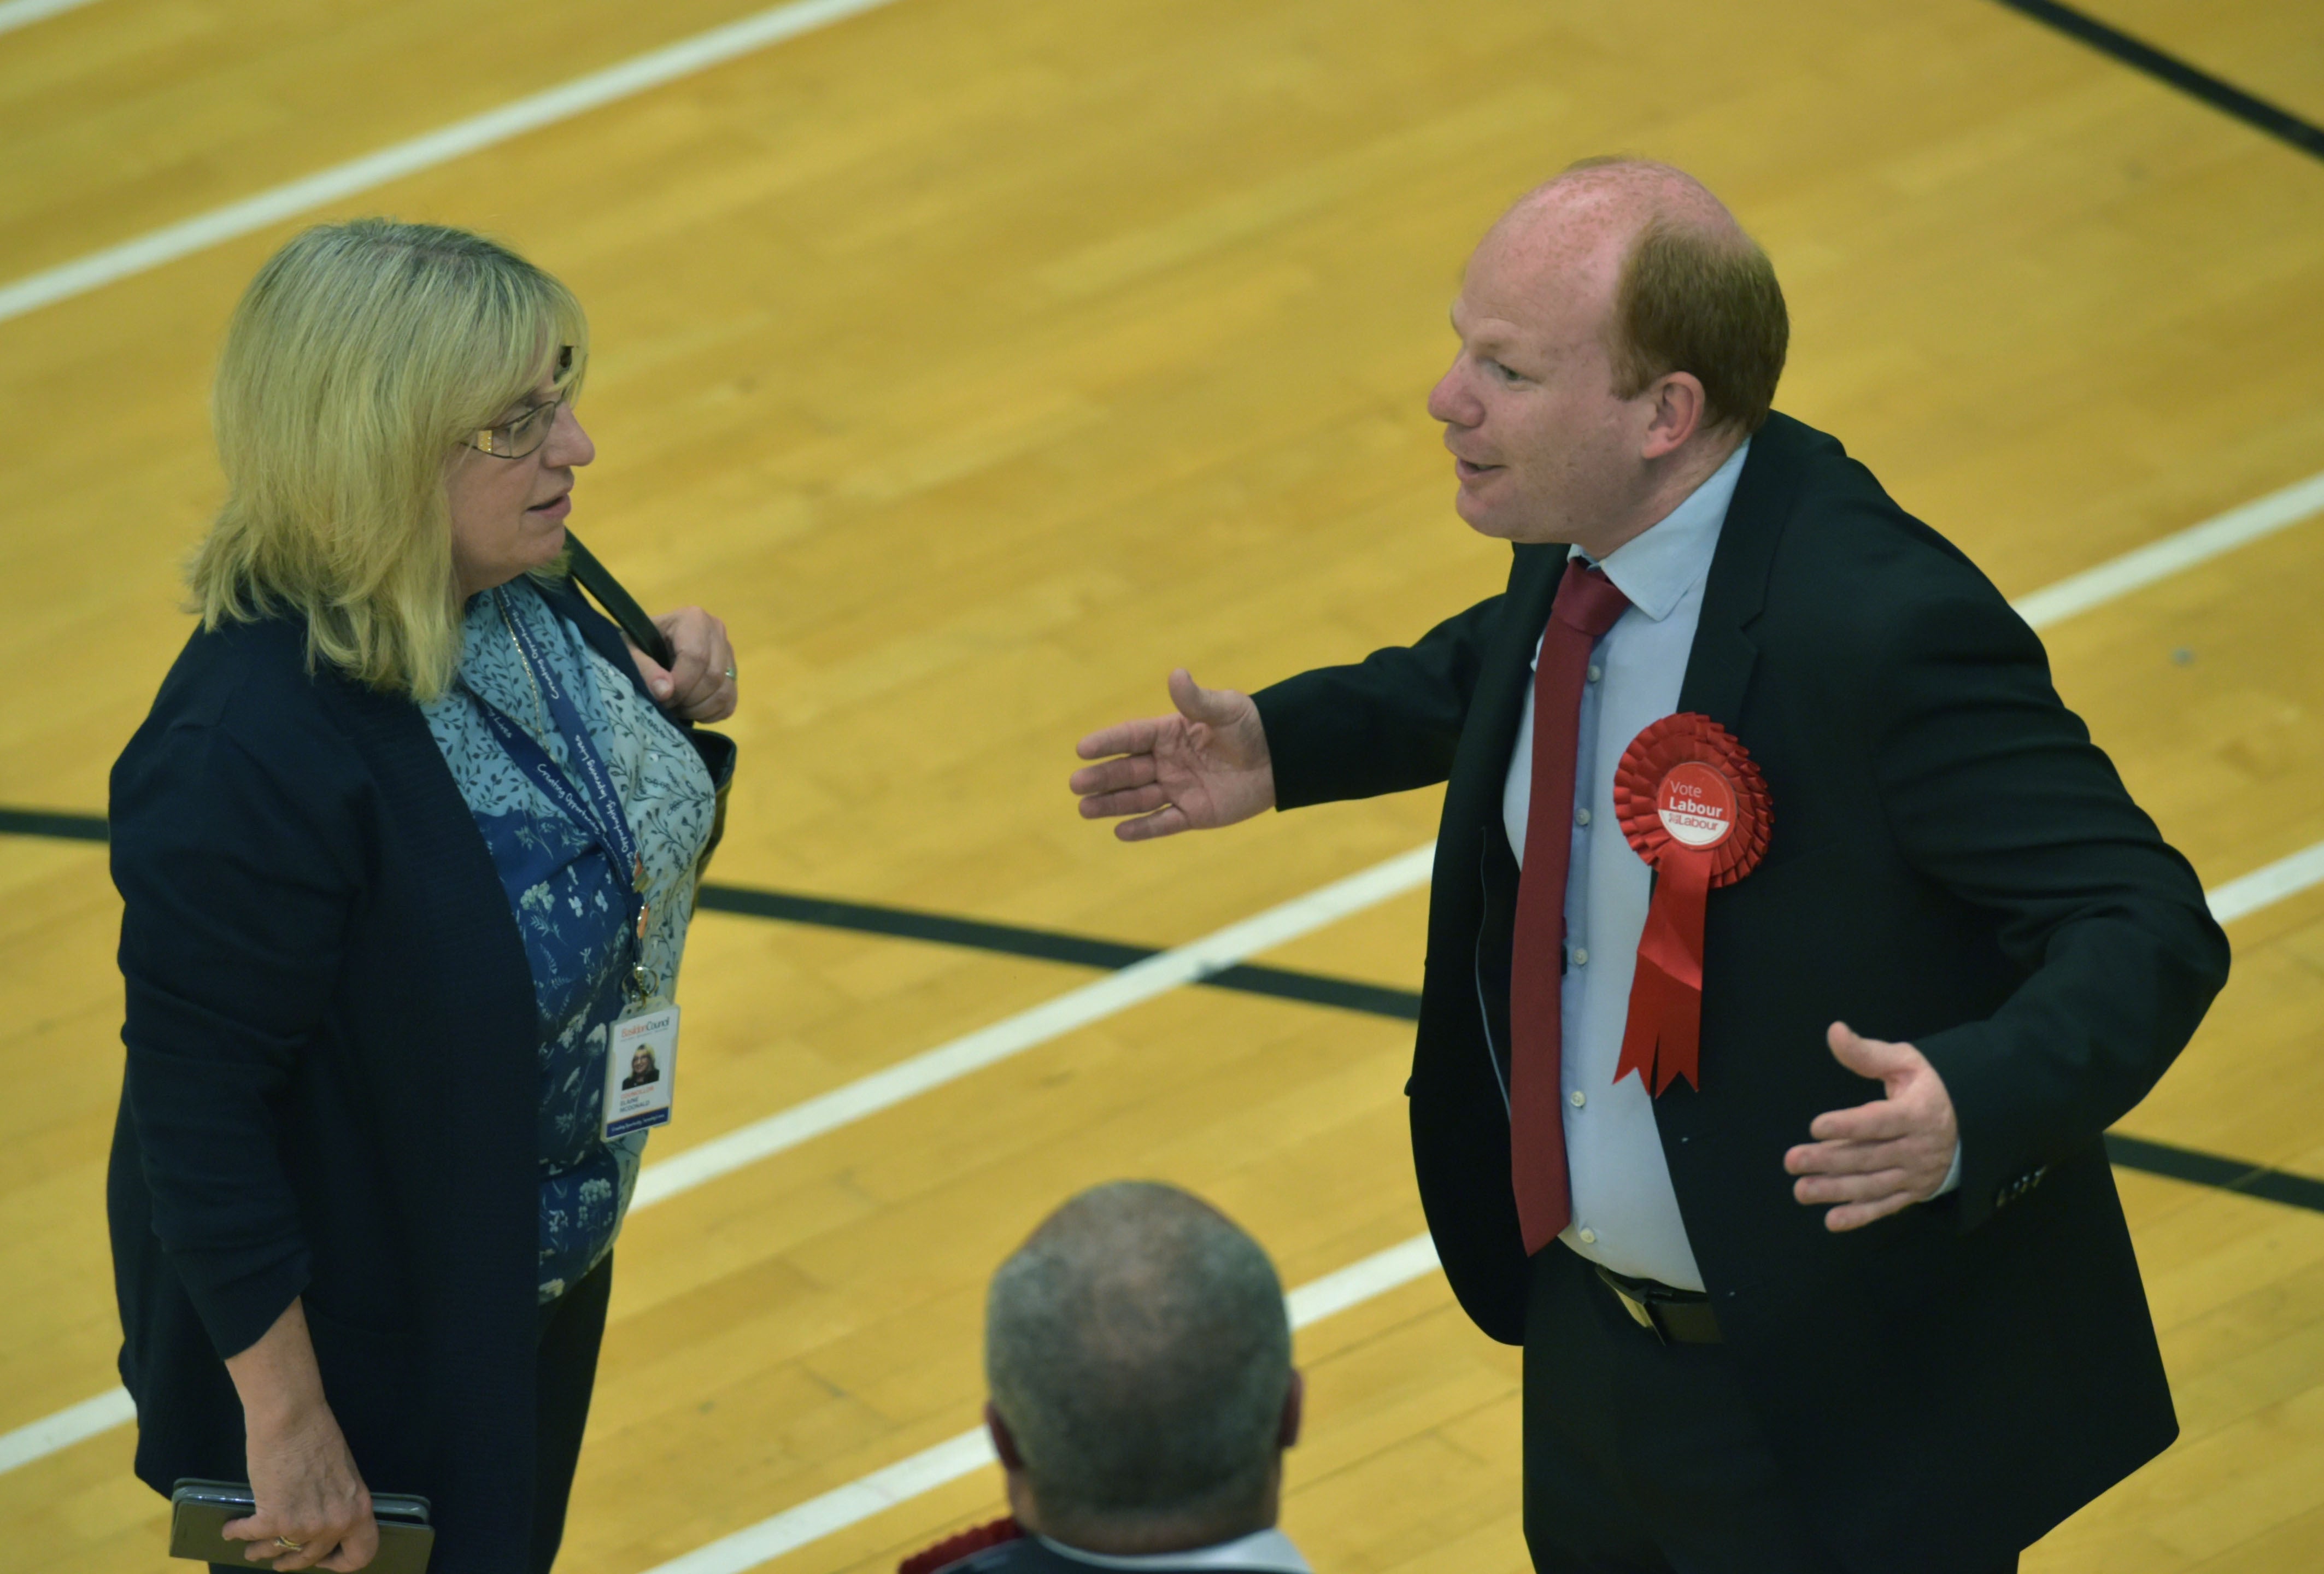 Leader of the Labour group in Basildon, Jack Ferguson (right) reacts after losing his seat in the Pitsea North West Ward, at the Basildon Sporting Village, in Basildon, Essex. (Nick Ansell/ PA)